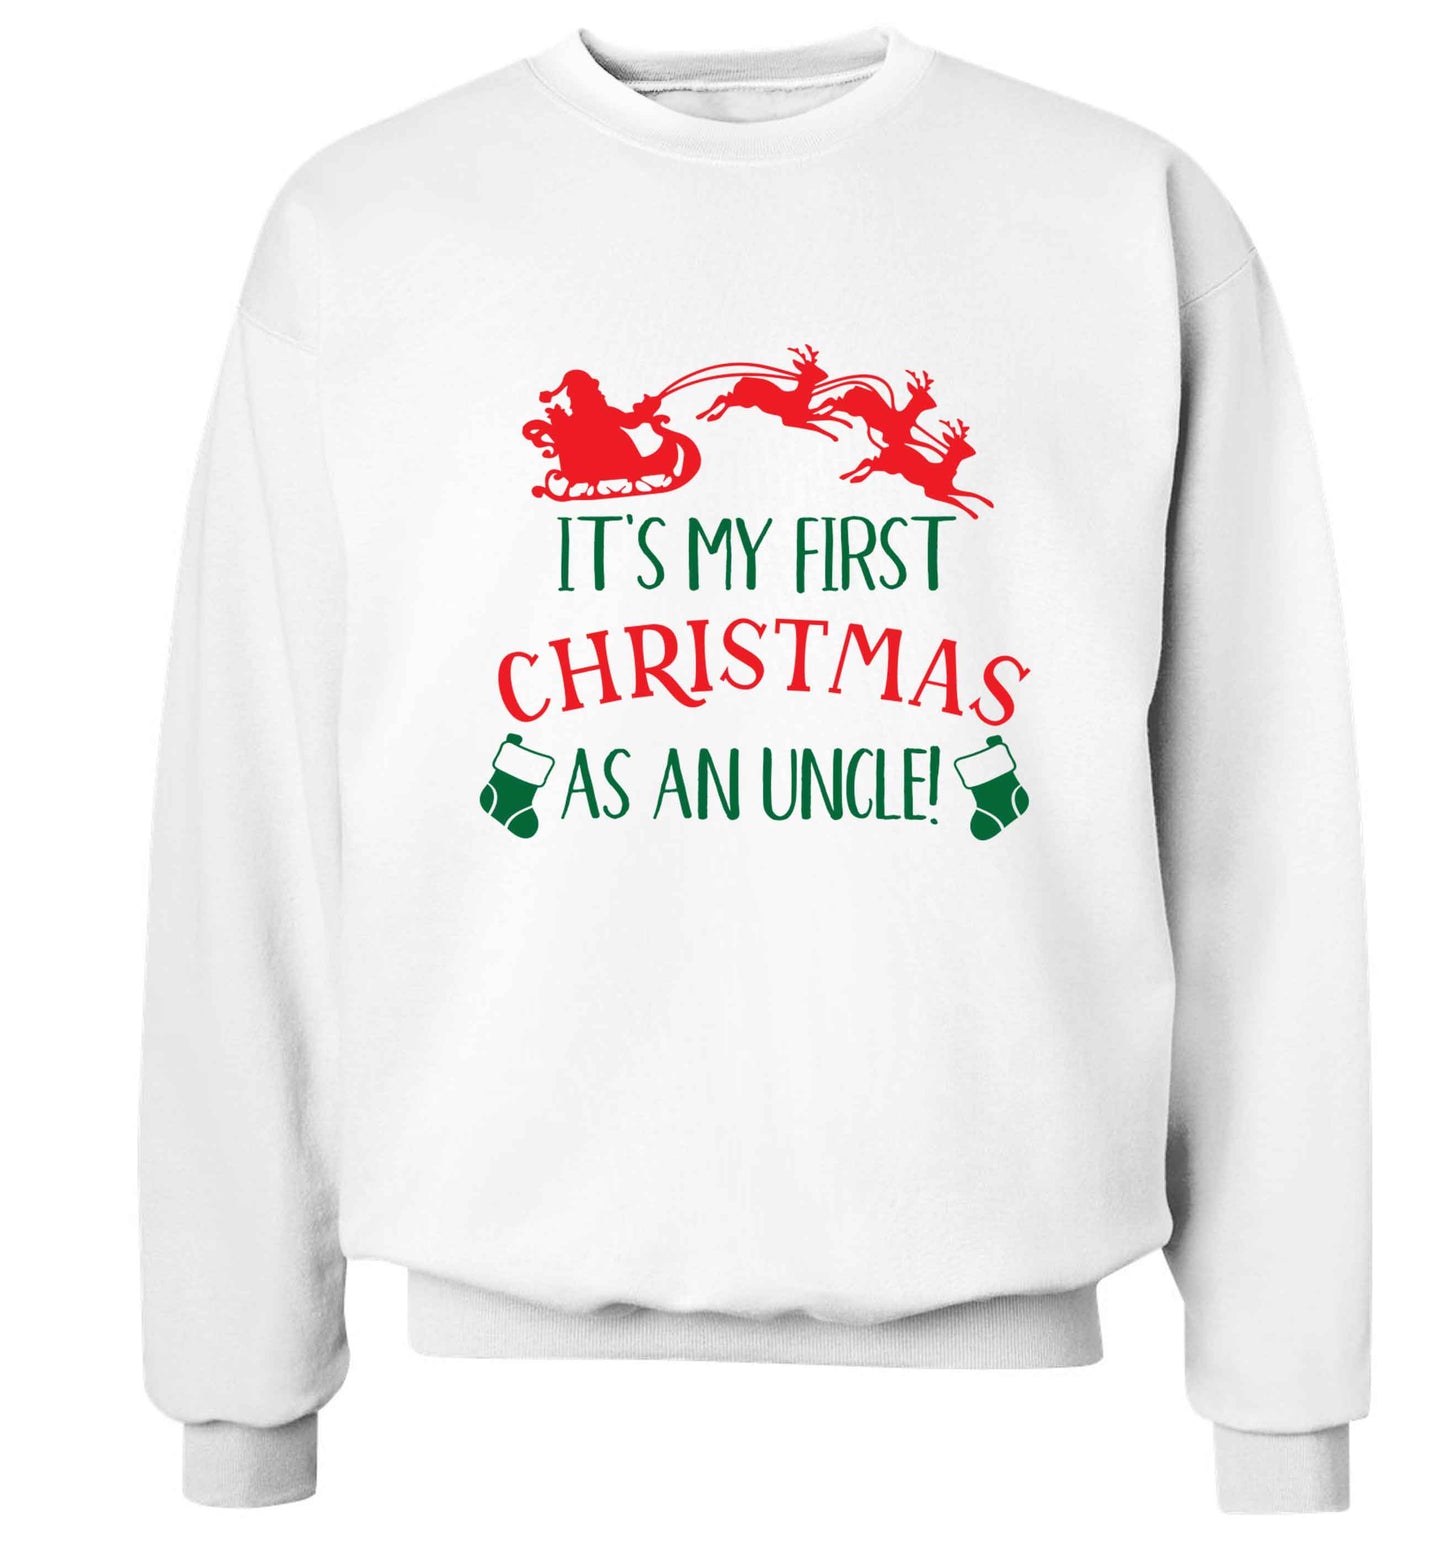 It's my first Christmas as an uncle! Adult's unisex white Sweater 2XL